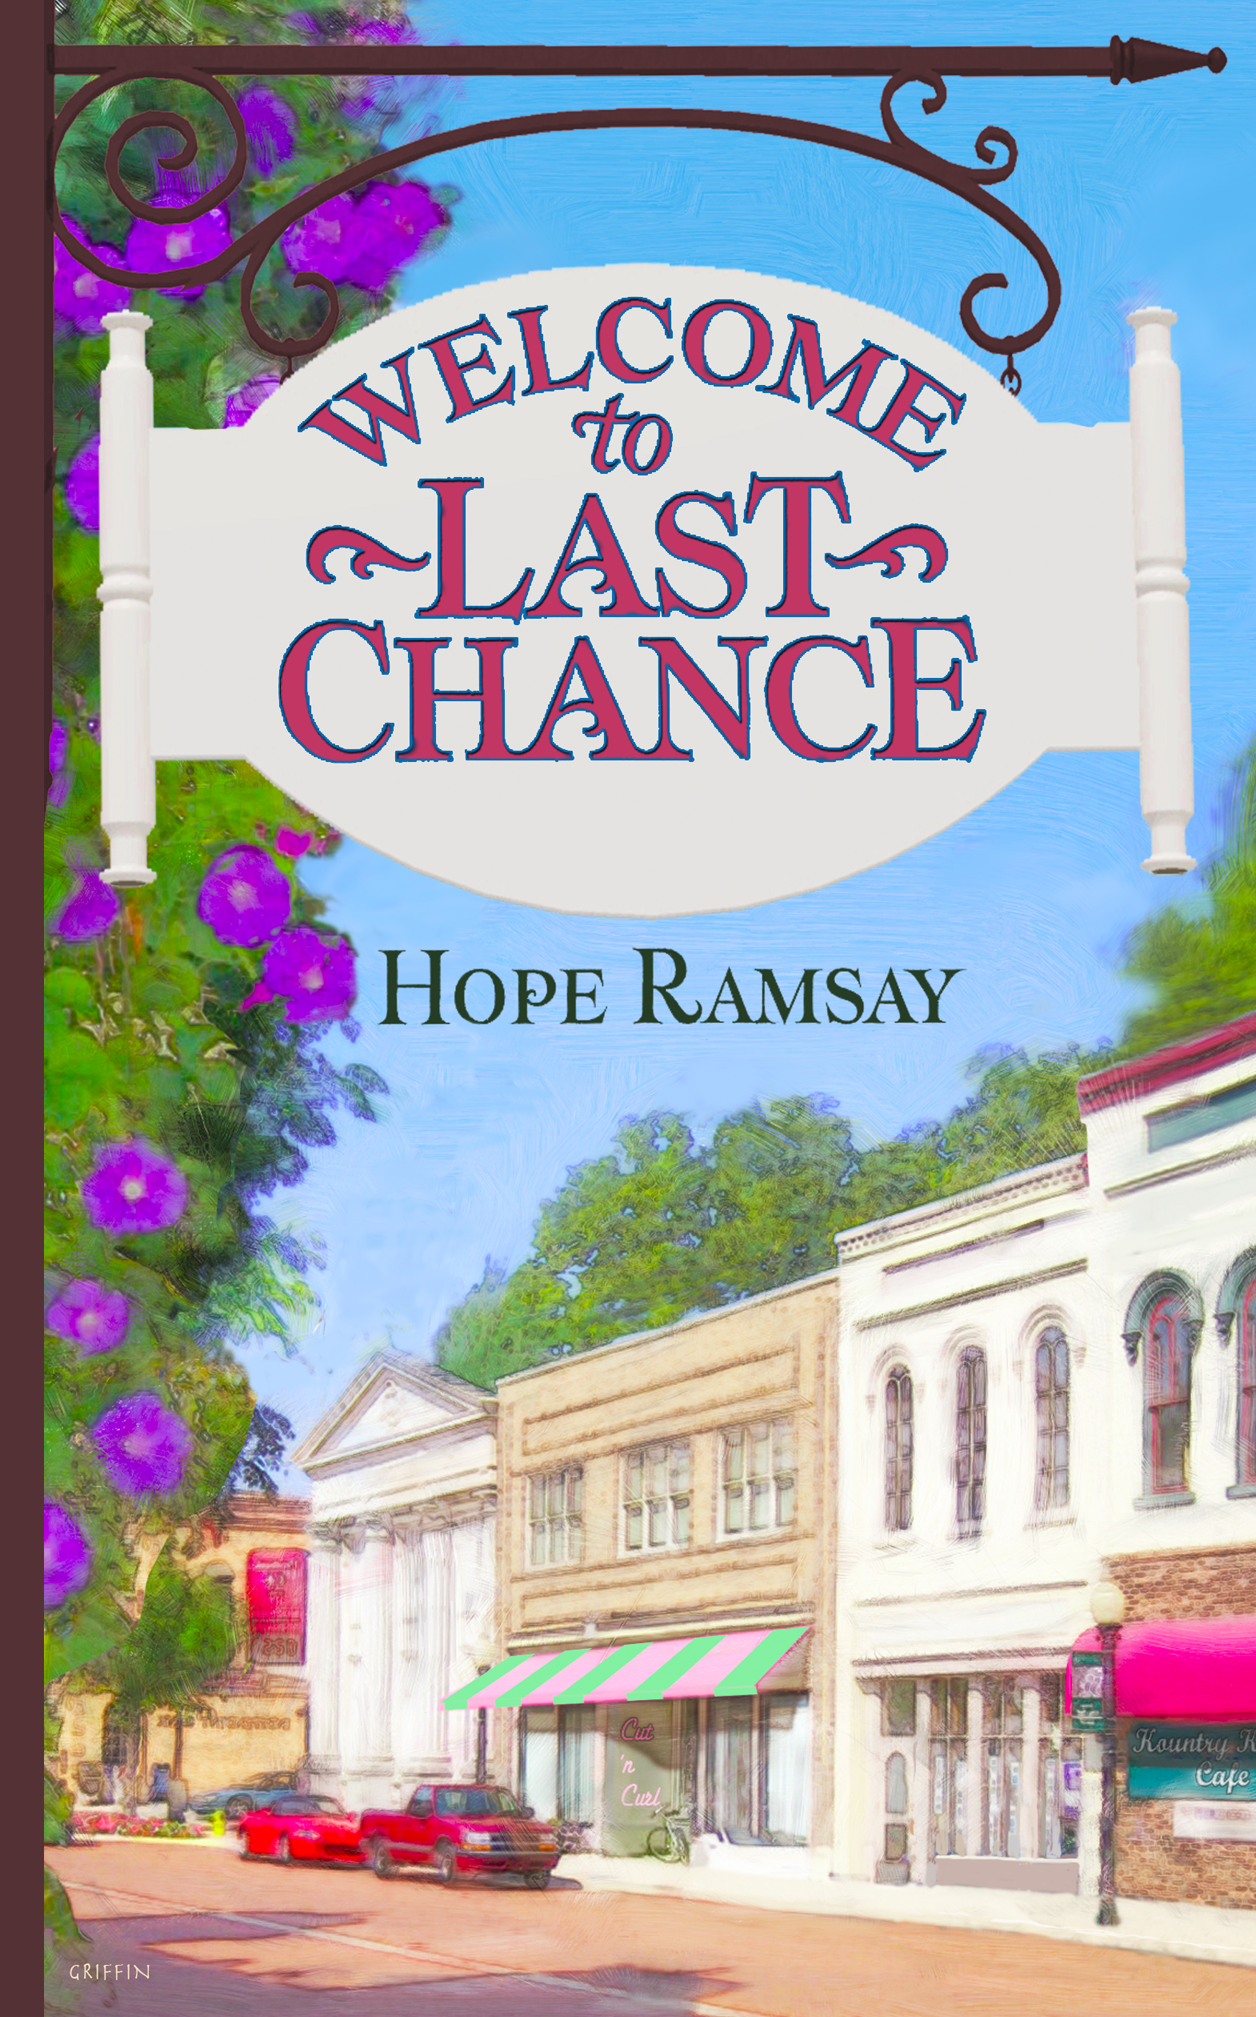 Last Chance Summer by Hope Ramsay